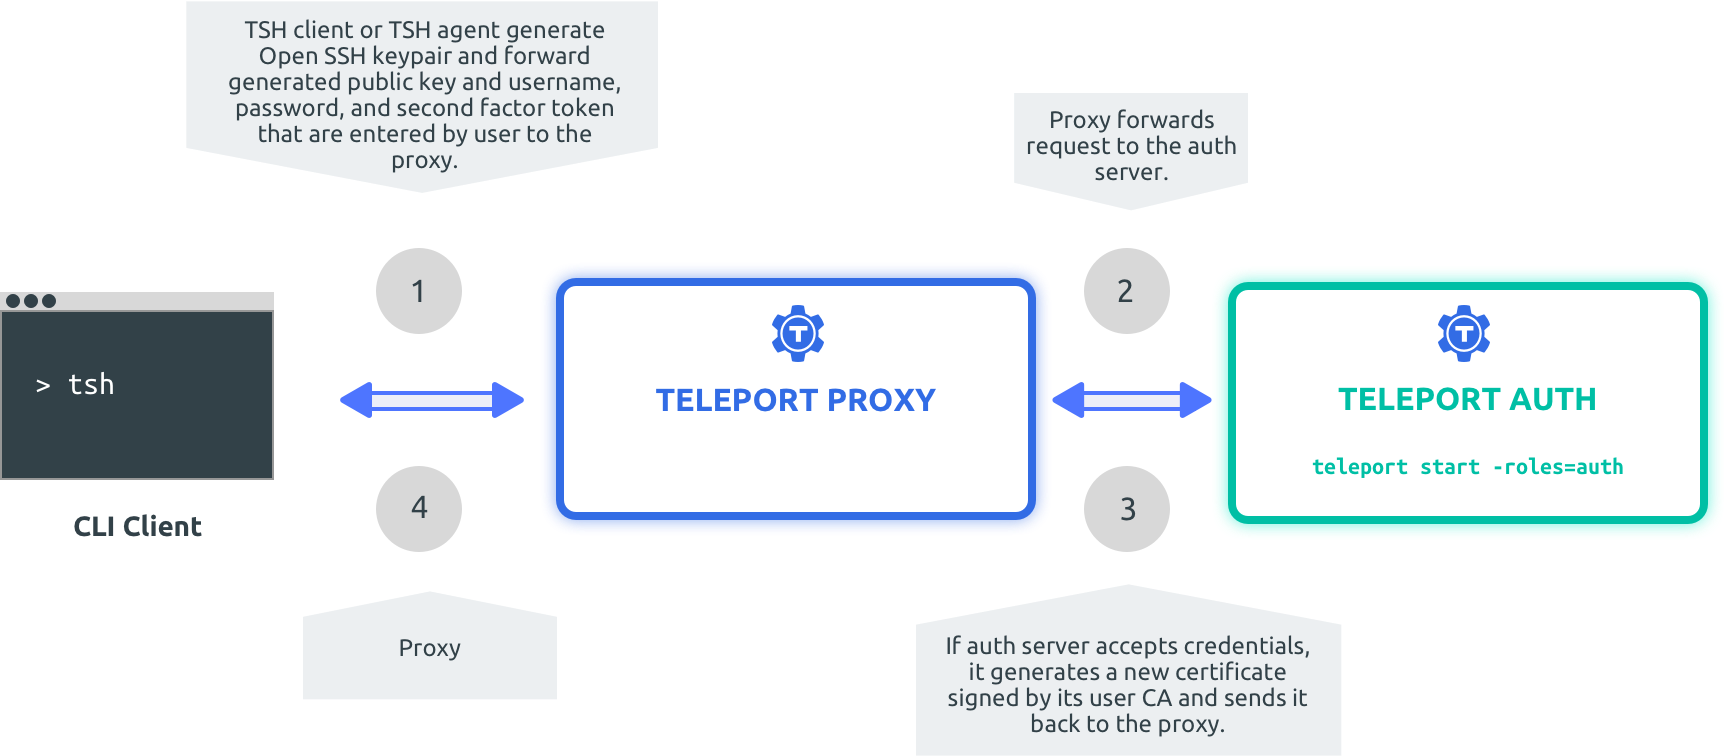 Teleport Proxy implements a special method to let clients get short lived certificates signed by auth's host certificate authority